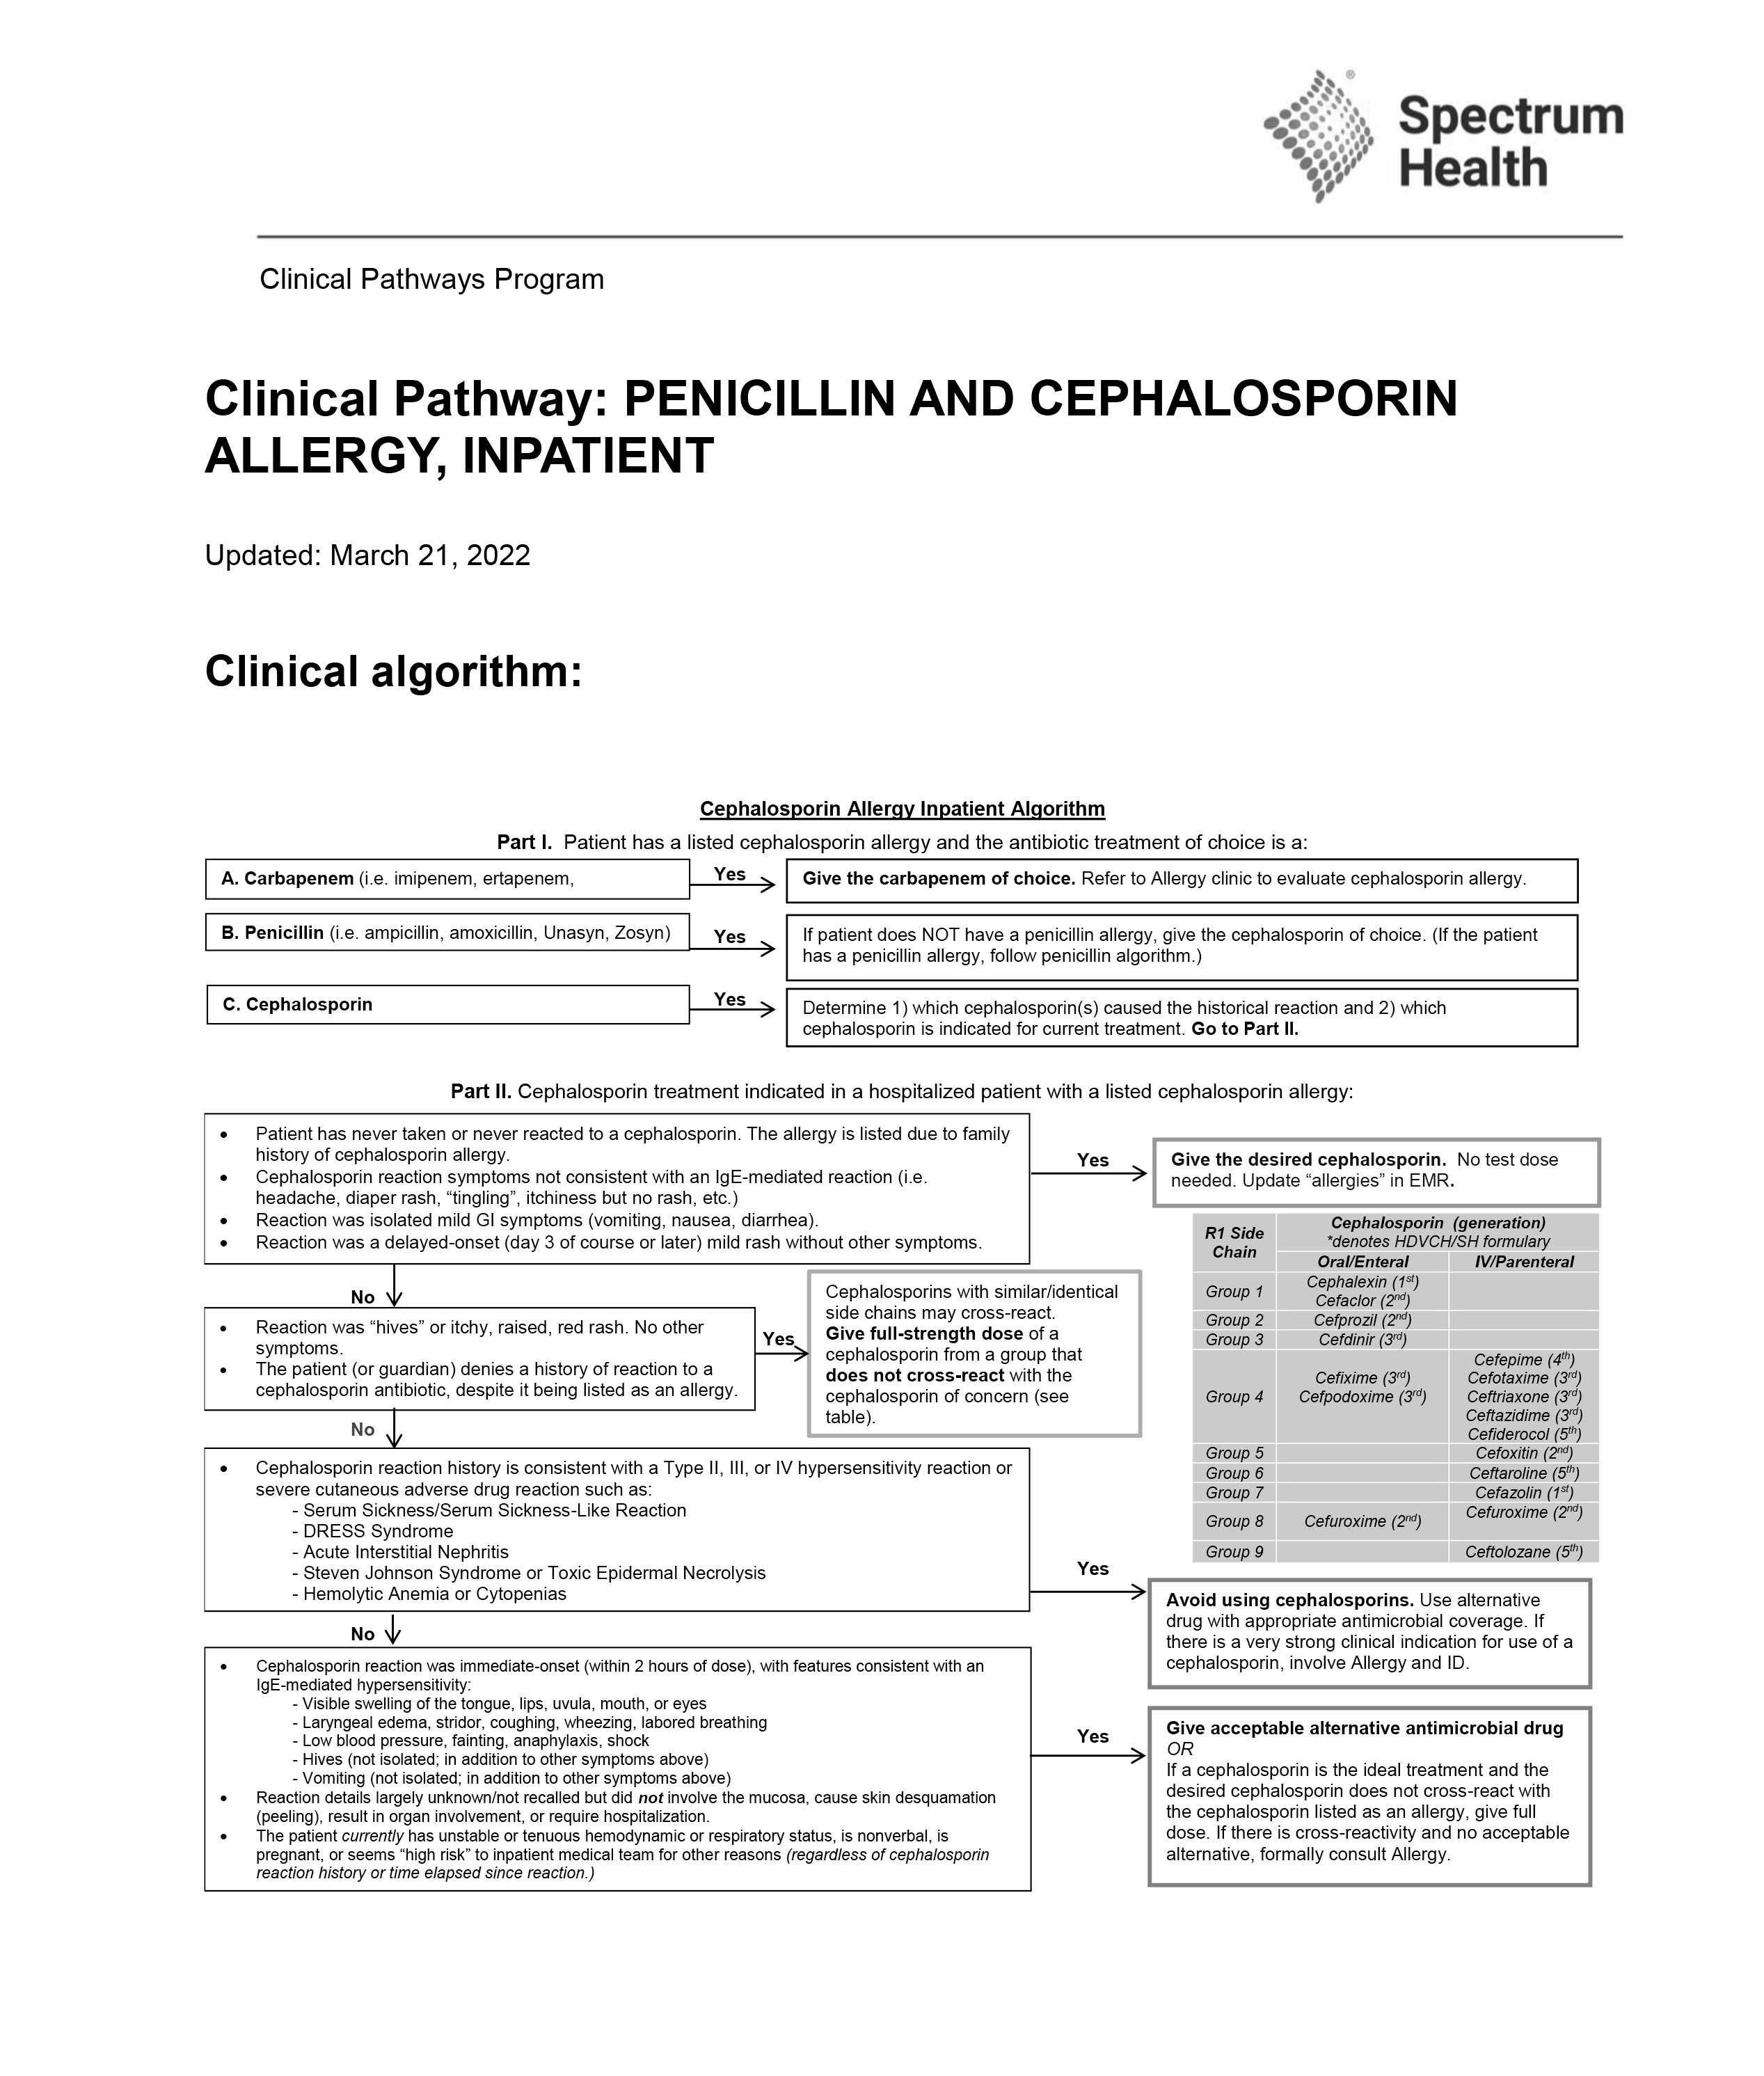 Clinical Pathways Document Image 1